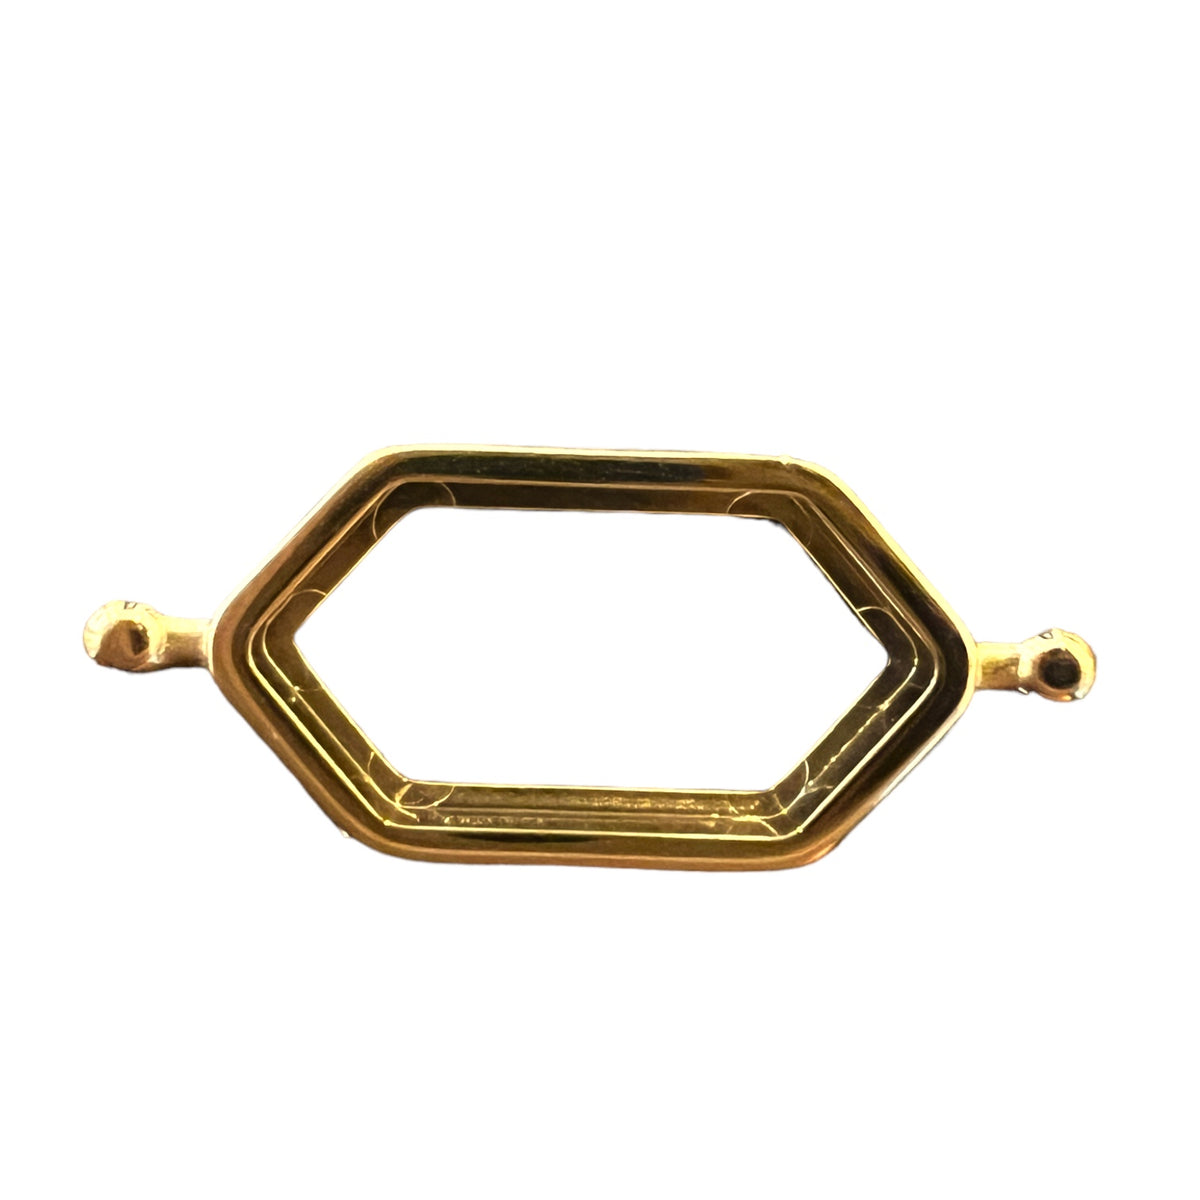 CONQUERing Open Hexbar-Shaped Spinner for DIY - Silver or Gold